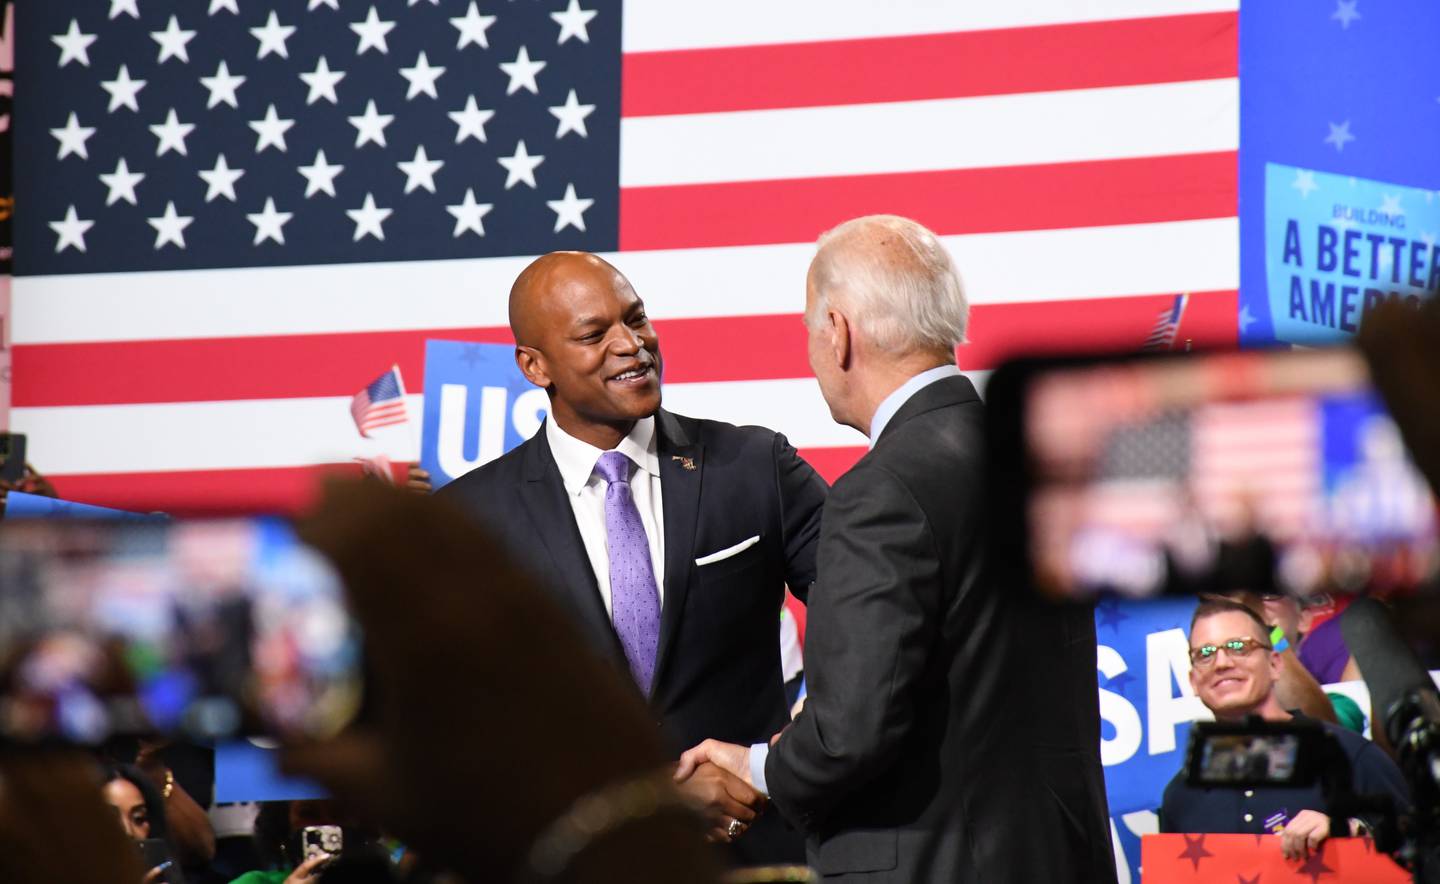 Maryland Democratic gubernatorial nominee Wes Moore welcomes President Joe Biden to the state at a rally at Richard Montgomery High School in Rockville on Aug. 25, 2022.